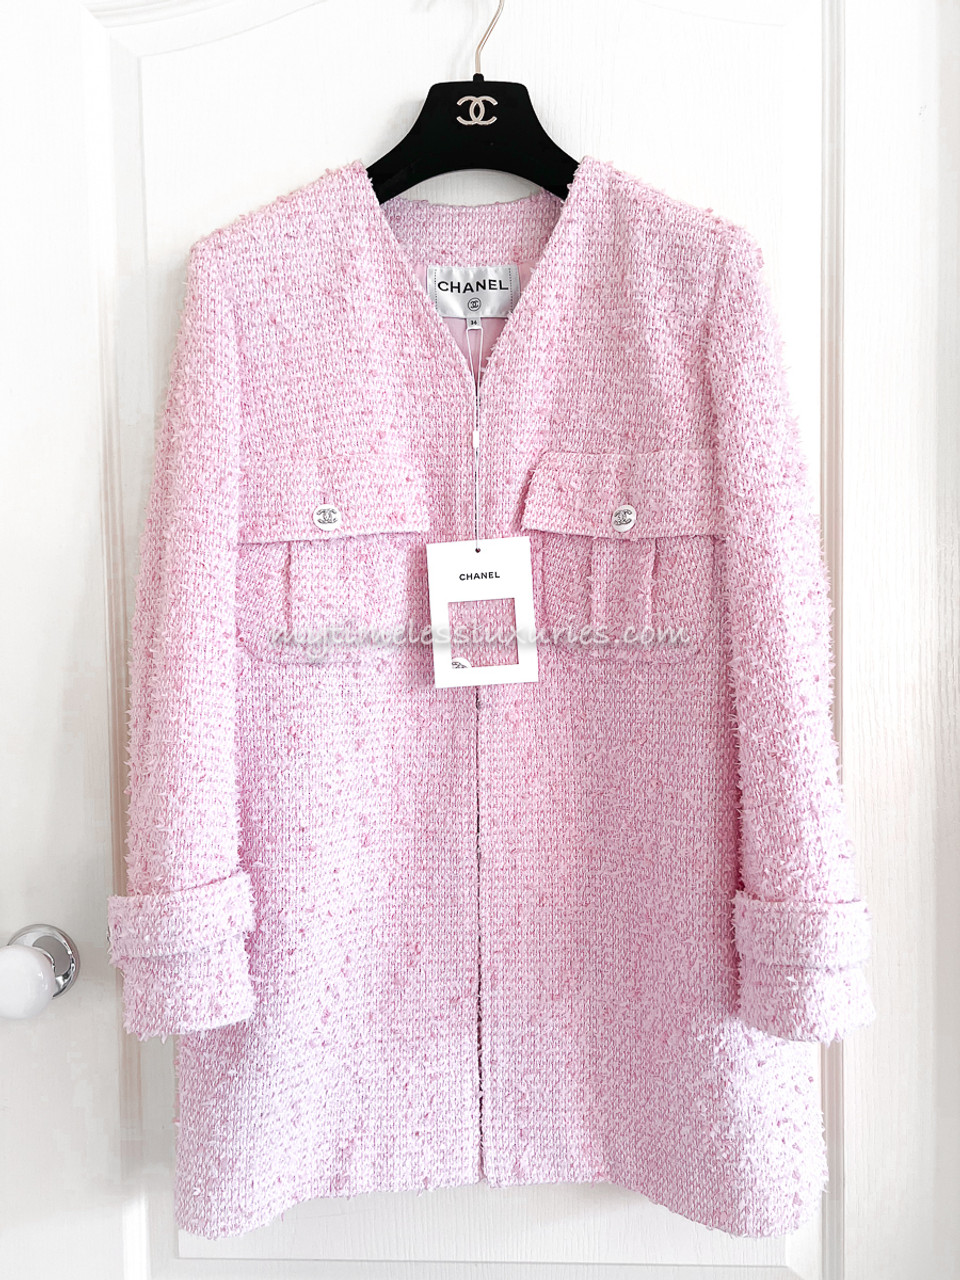 CHANEL 21C Pink Fantasy Tweed Jacket 36 FR New  Timeless Luxuries